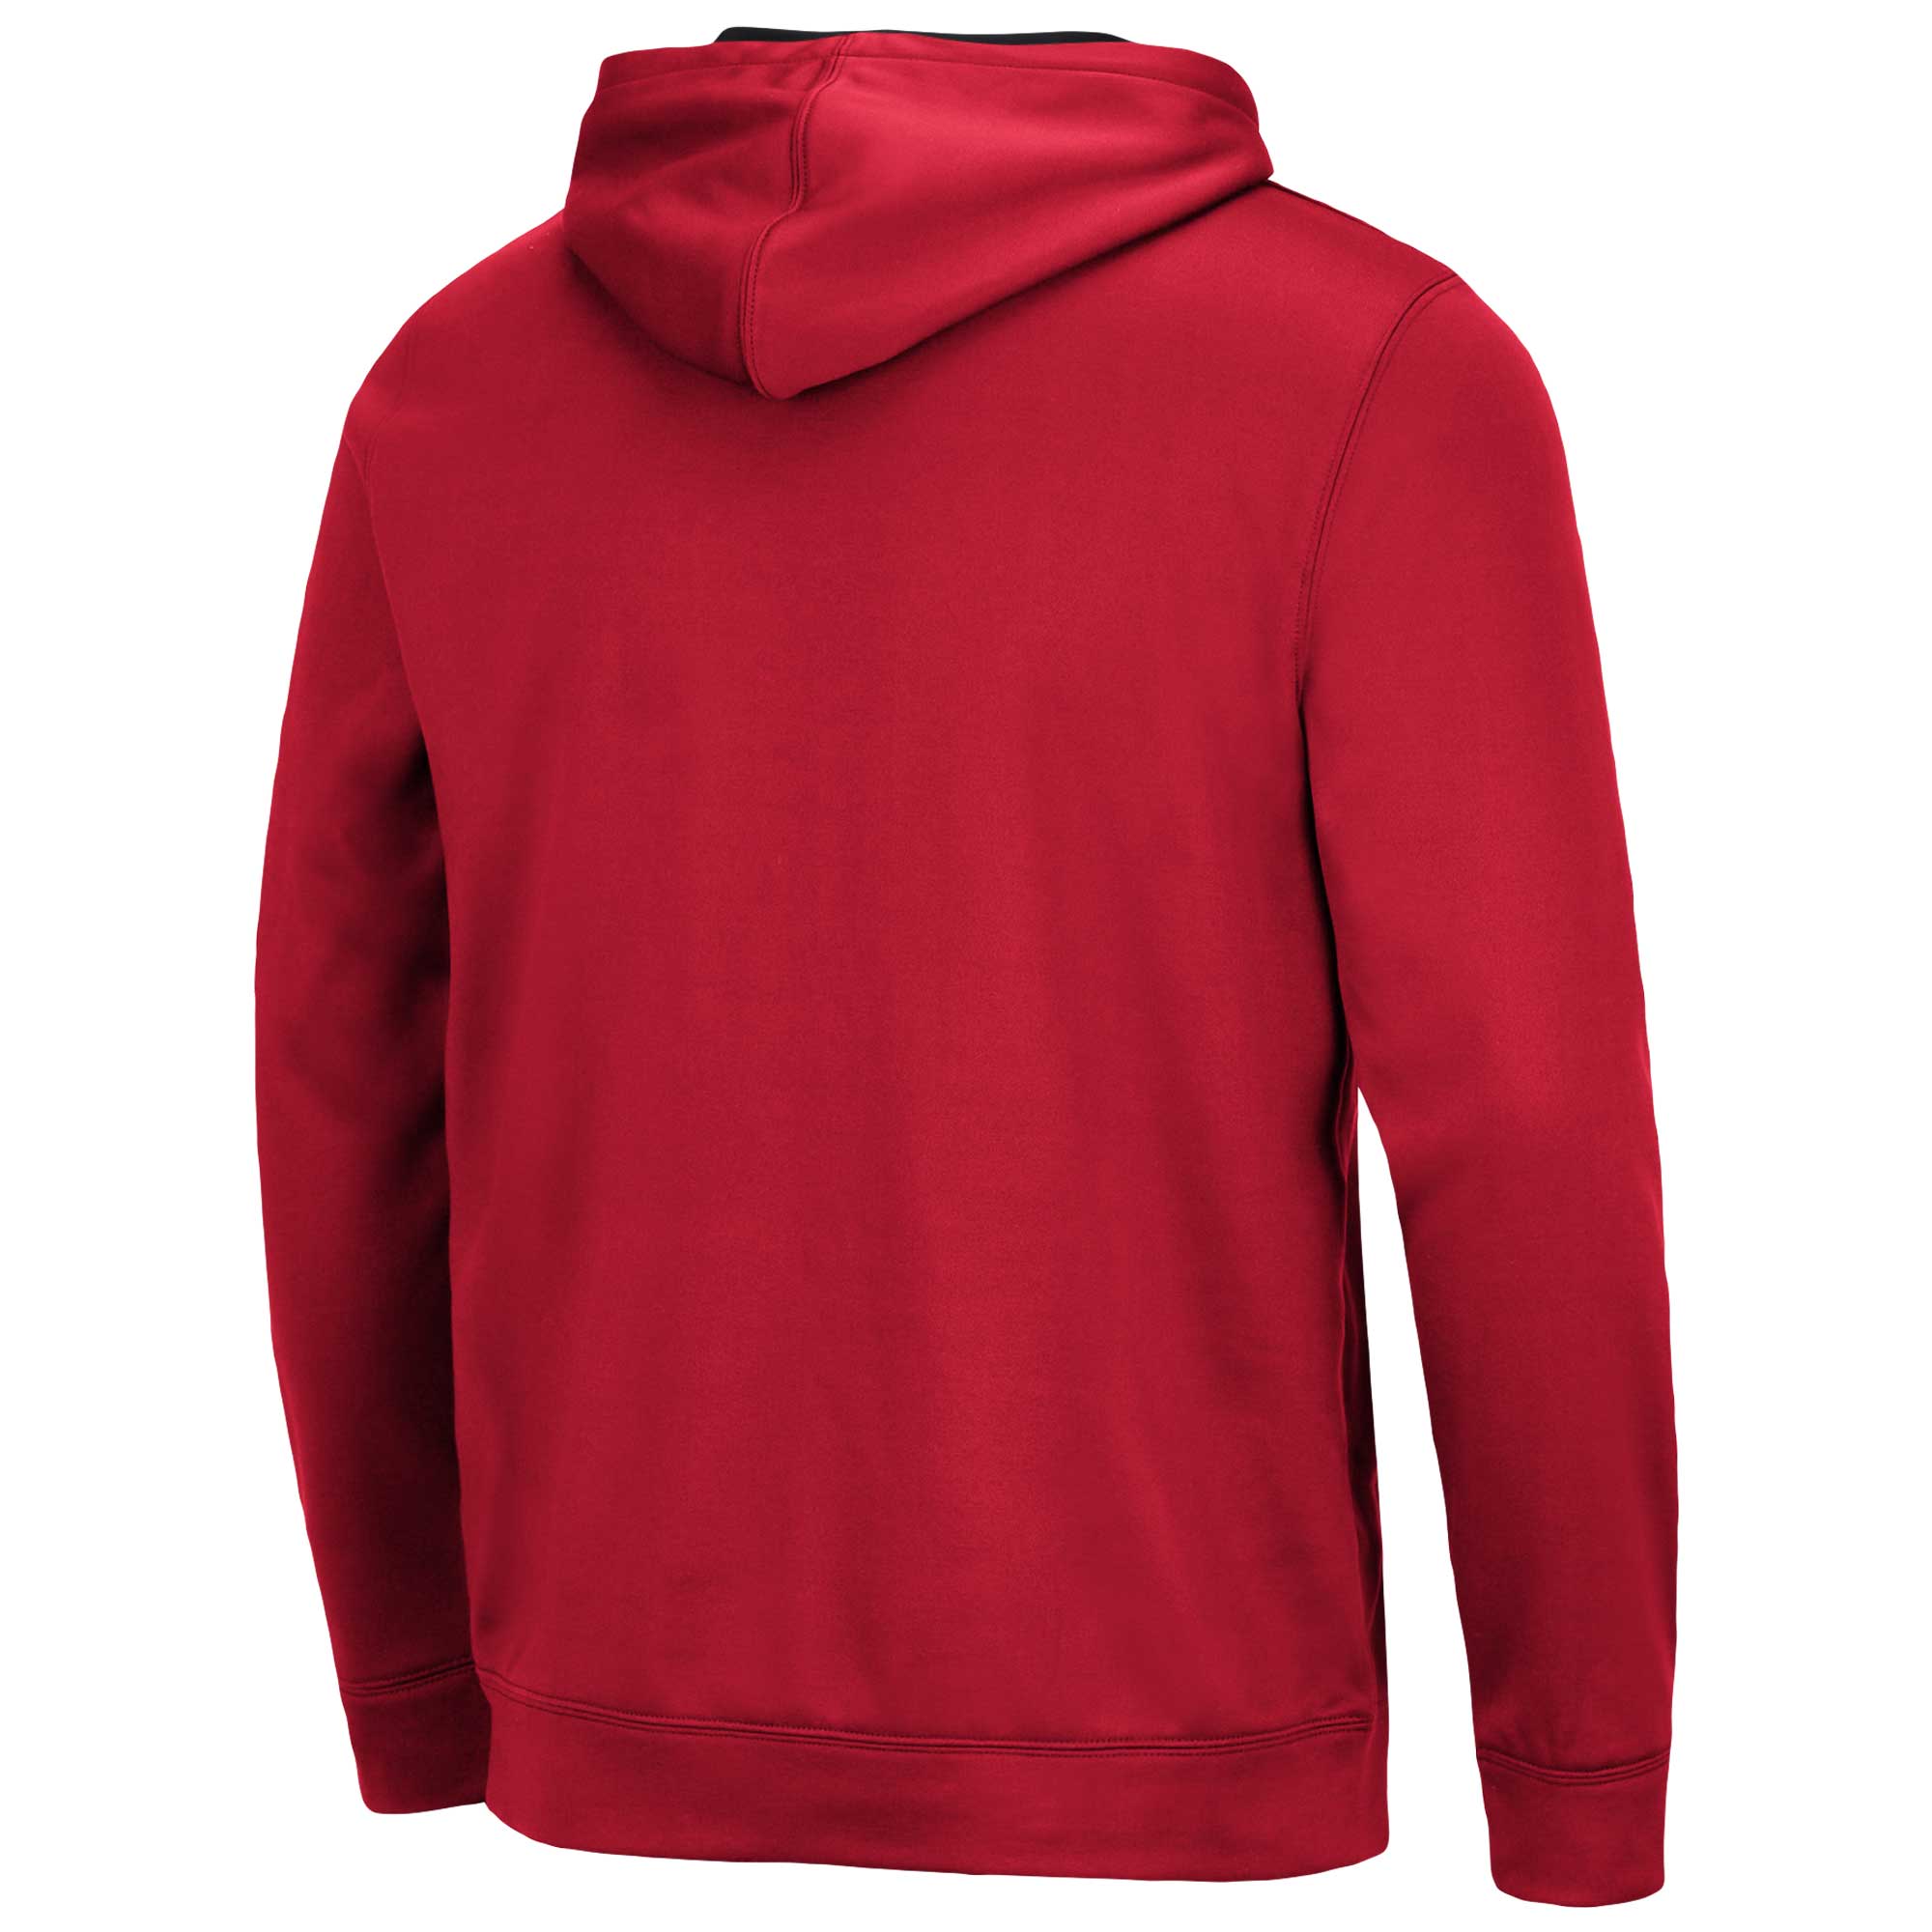 Men's Colosseum Red Louisville Cardinals Resistance-Pullover Hoodie - image 3 of 3